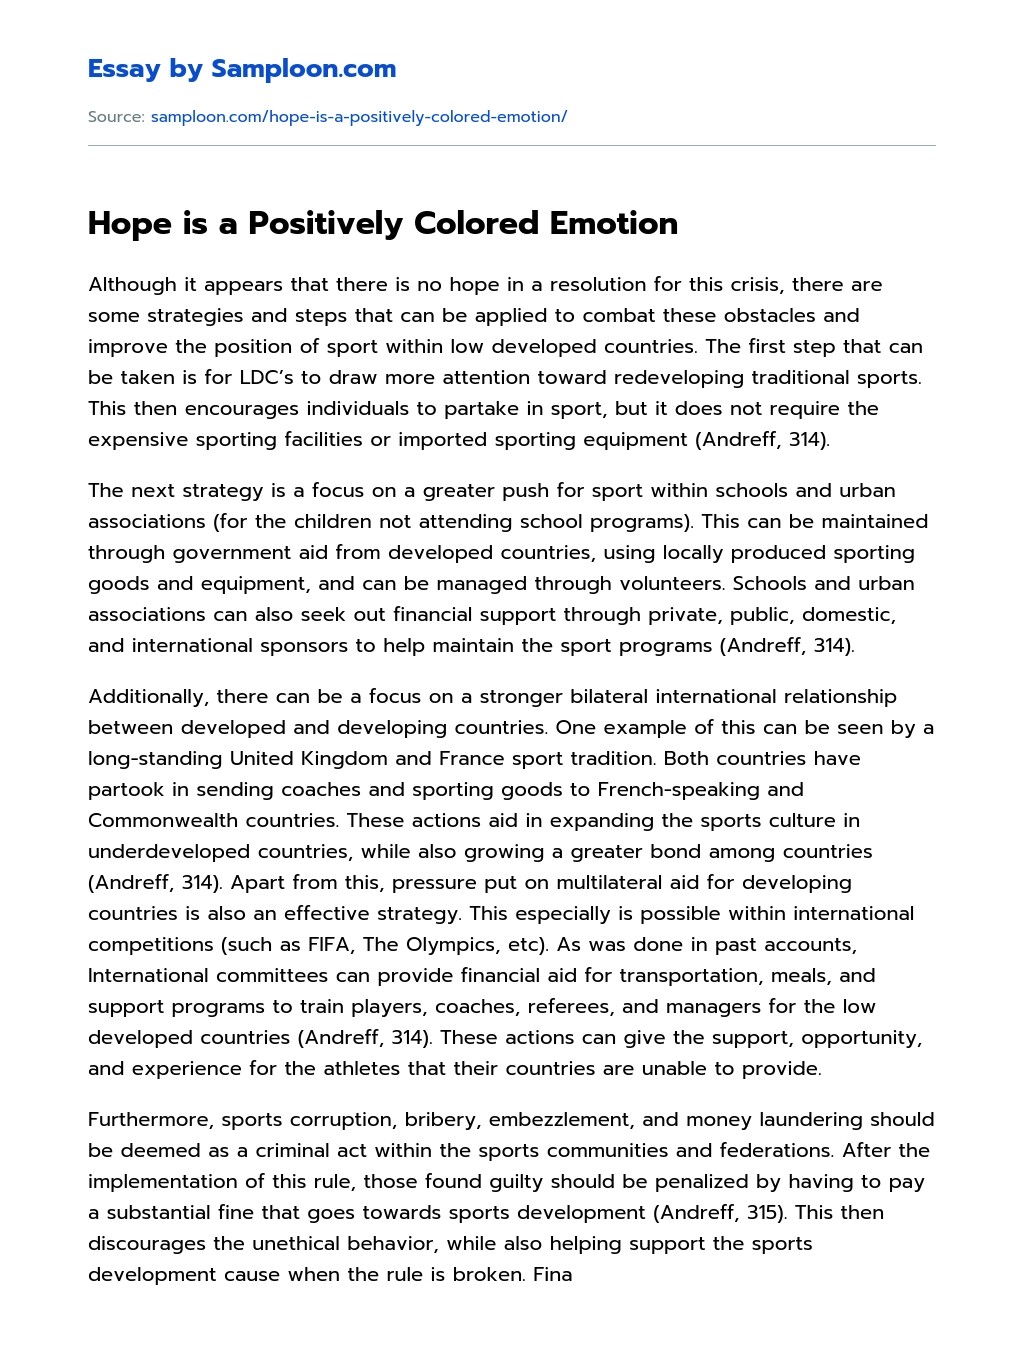 Hope is a Positively Colored Emotion essay